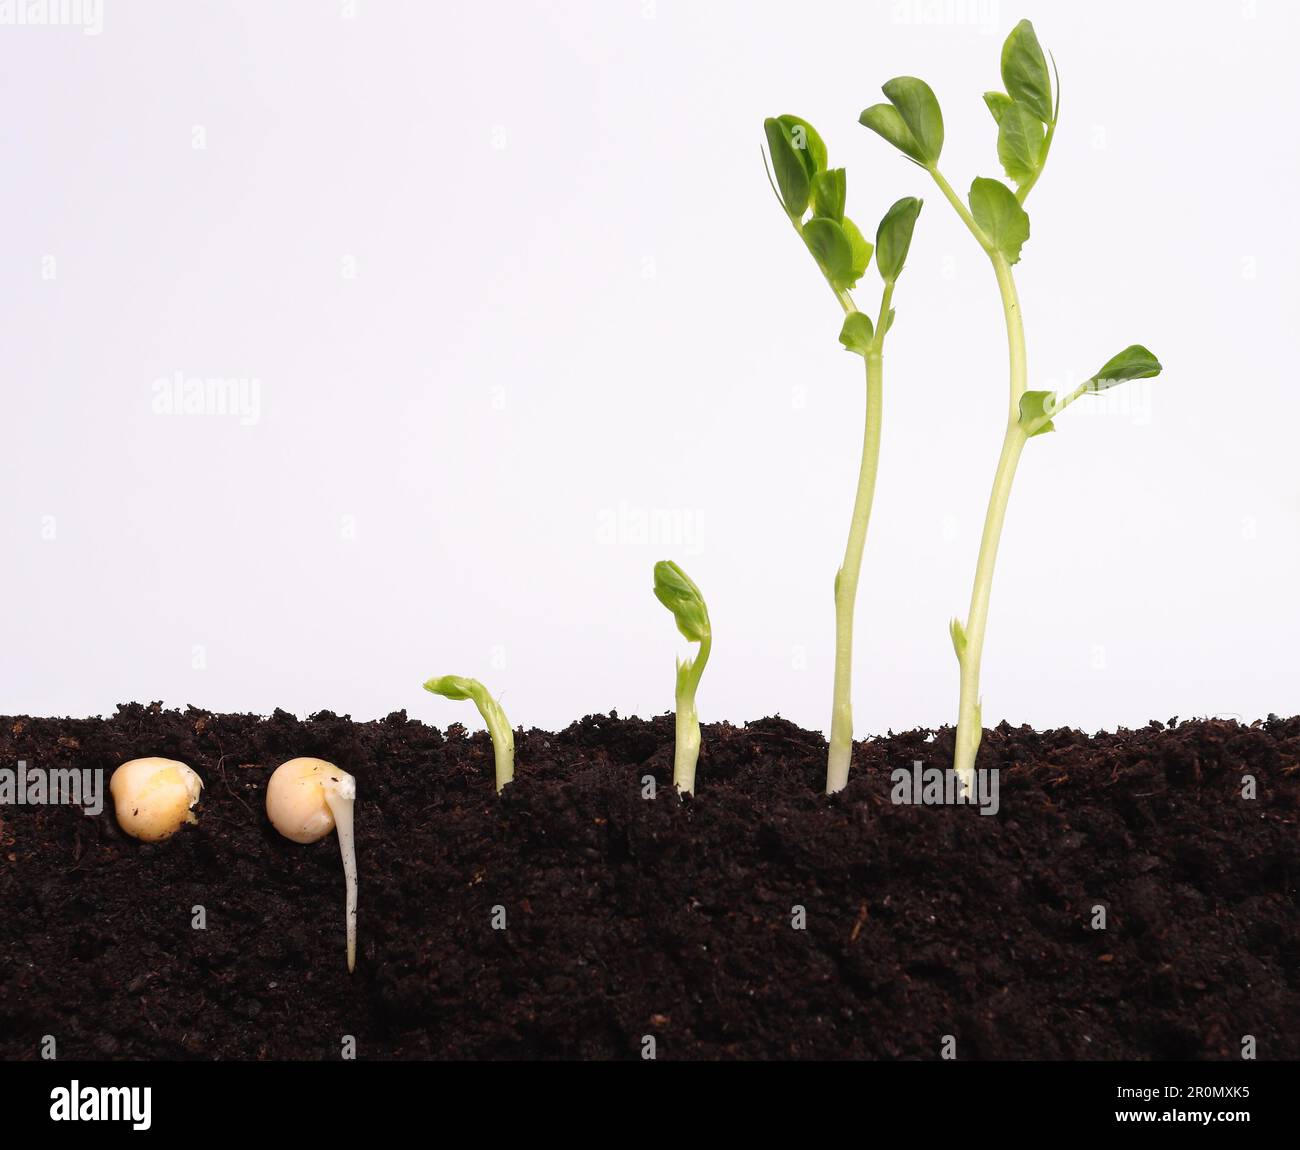 Sequence of grminating green pea seeds in soil Stock Photo